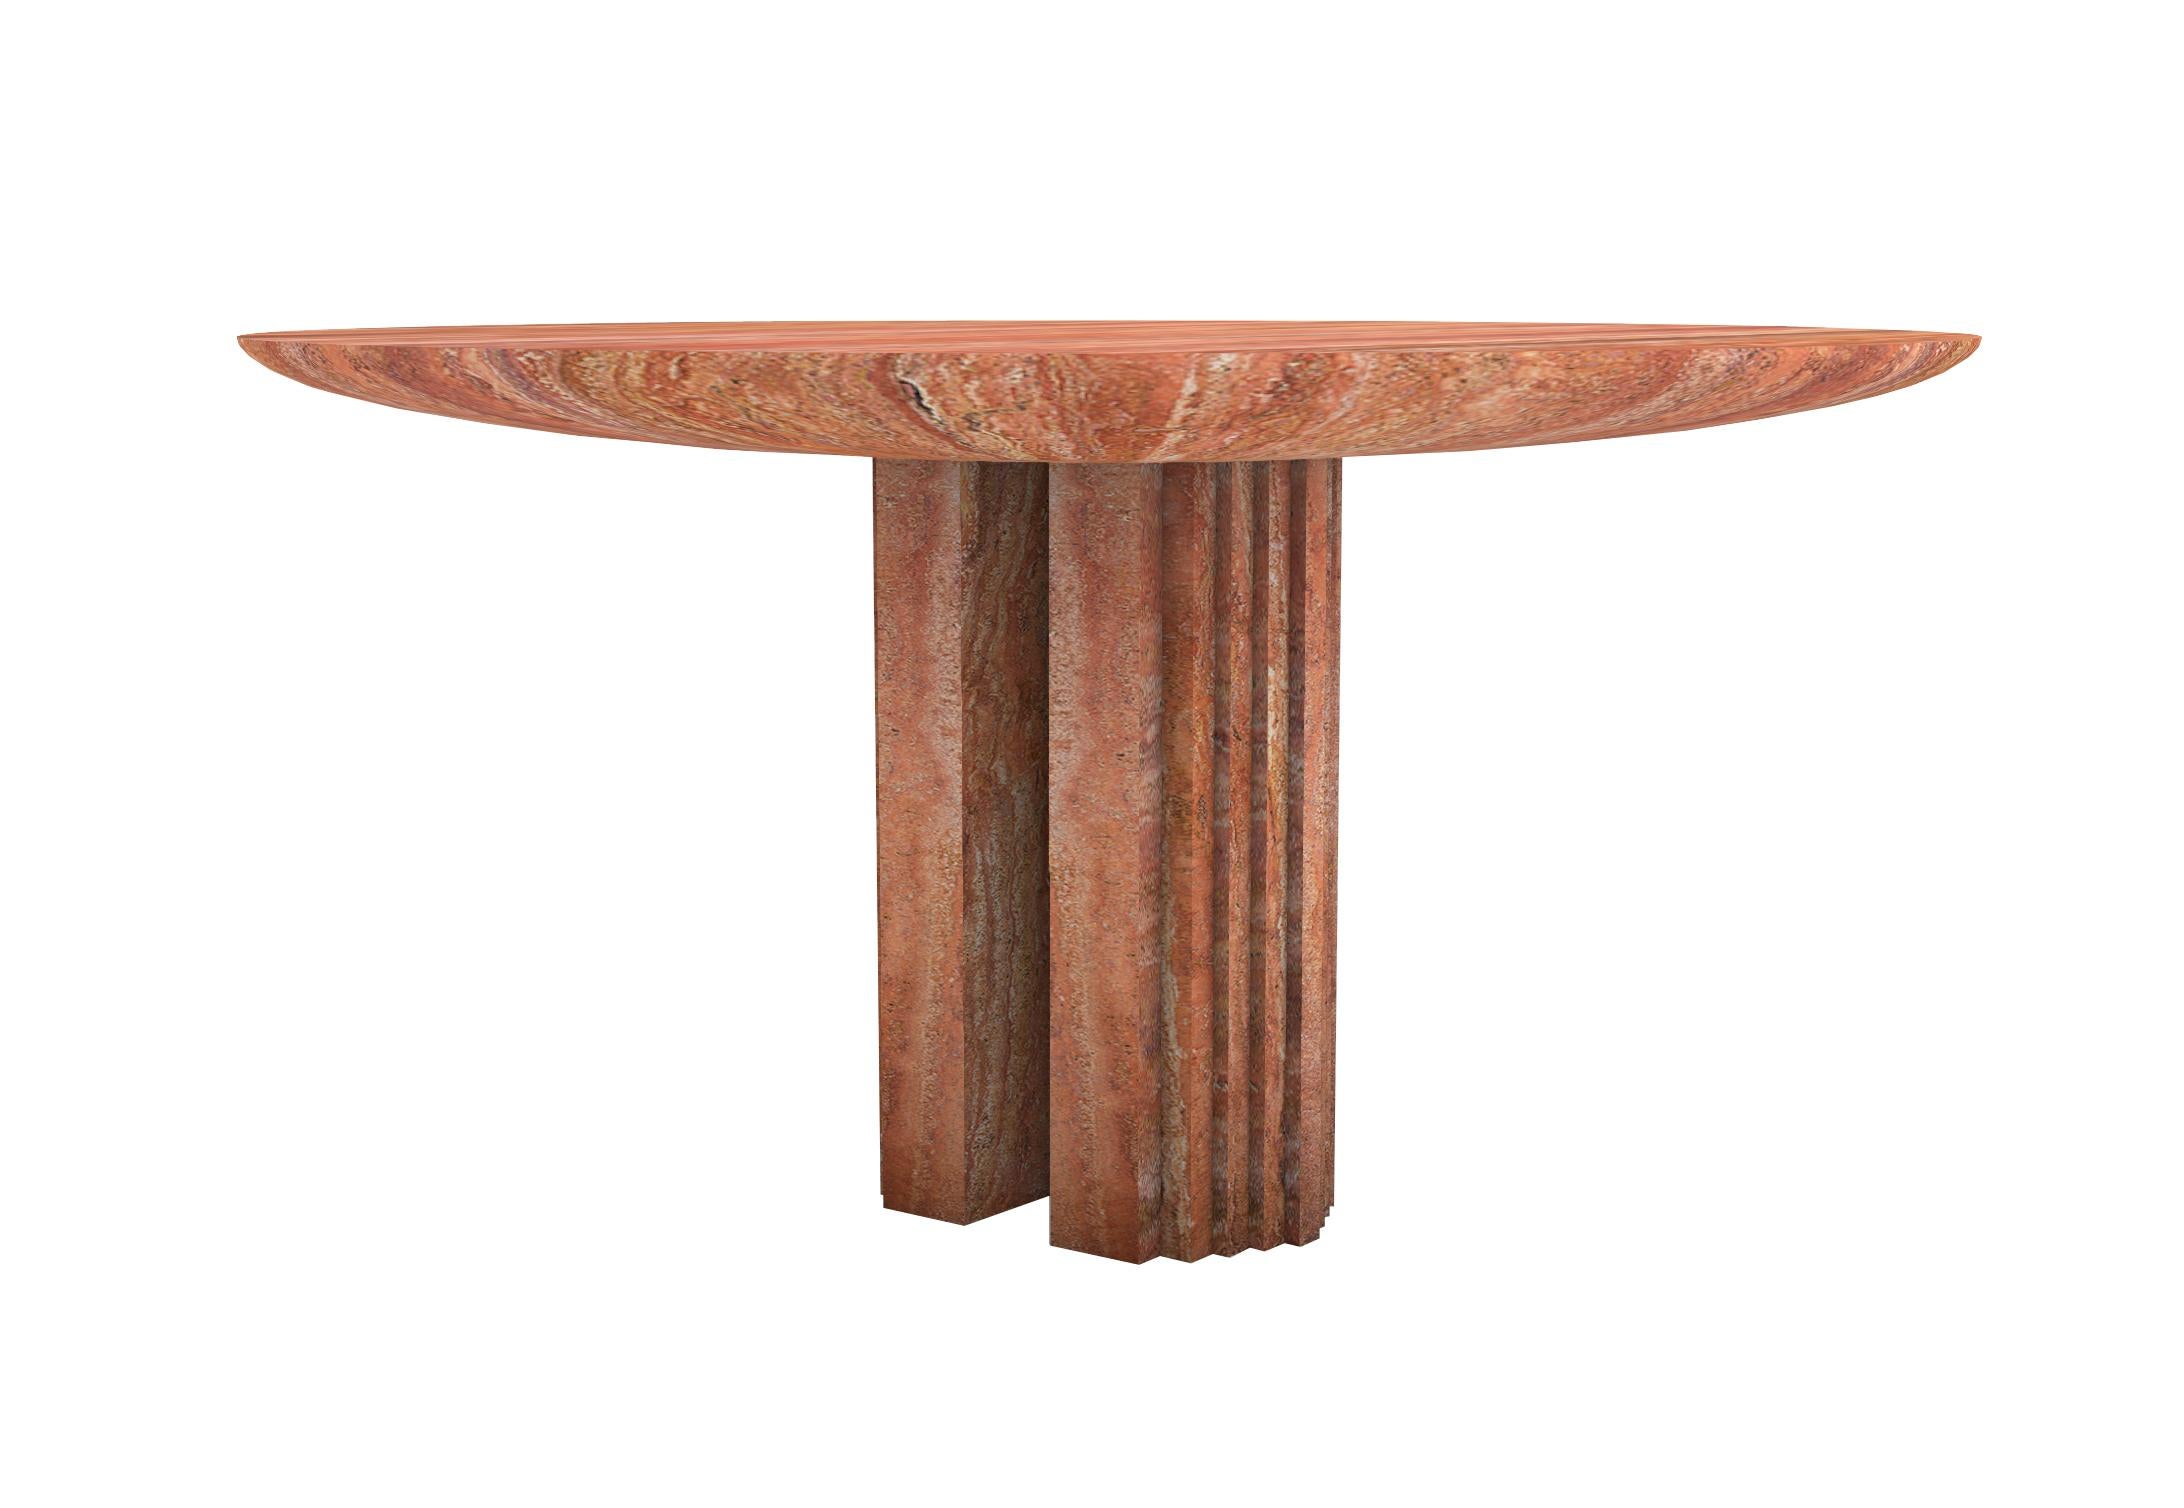 “Dining table 0024c” is a sculptural table in Travertine Red created by the artist Desia Ava. 
The piece features strong lines and gentle curves. Marked by architectural aesthetics, on the borderline between sculpture and furniture the Marble block